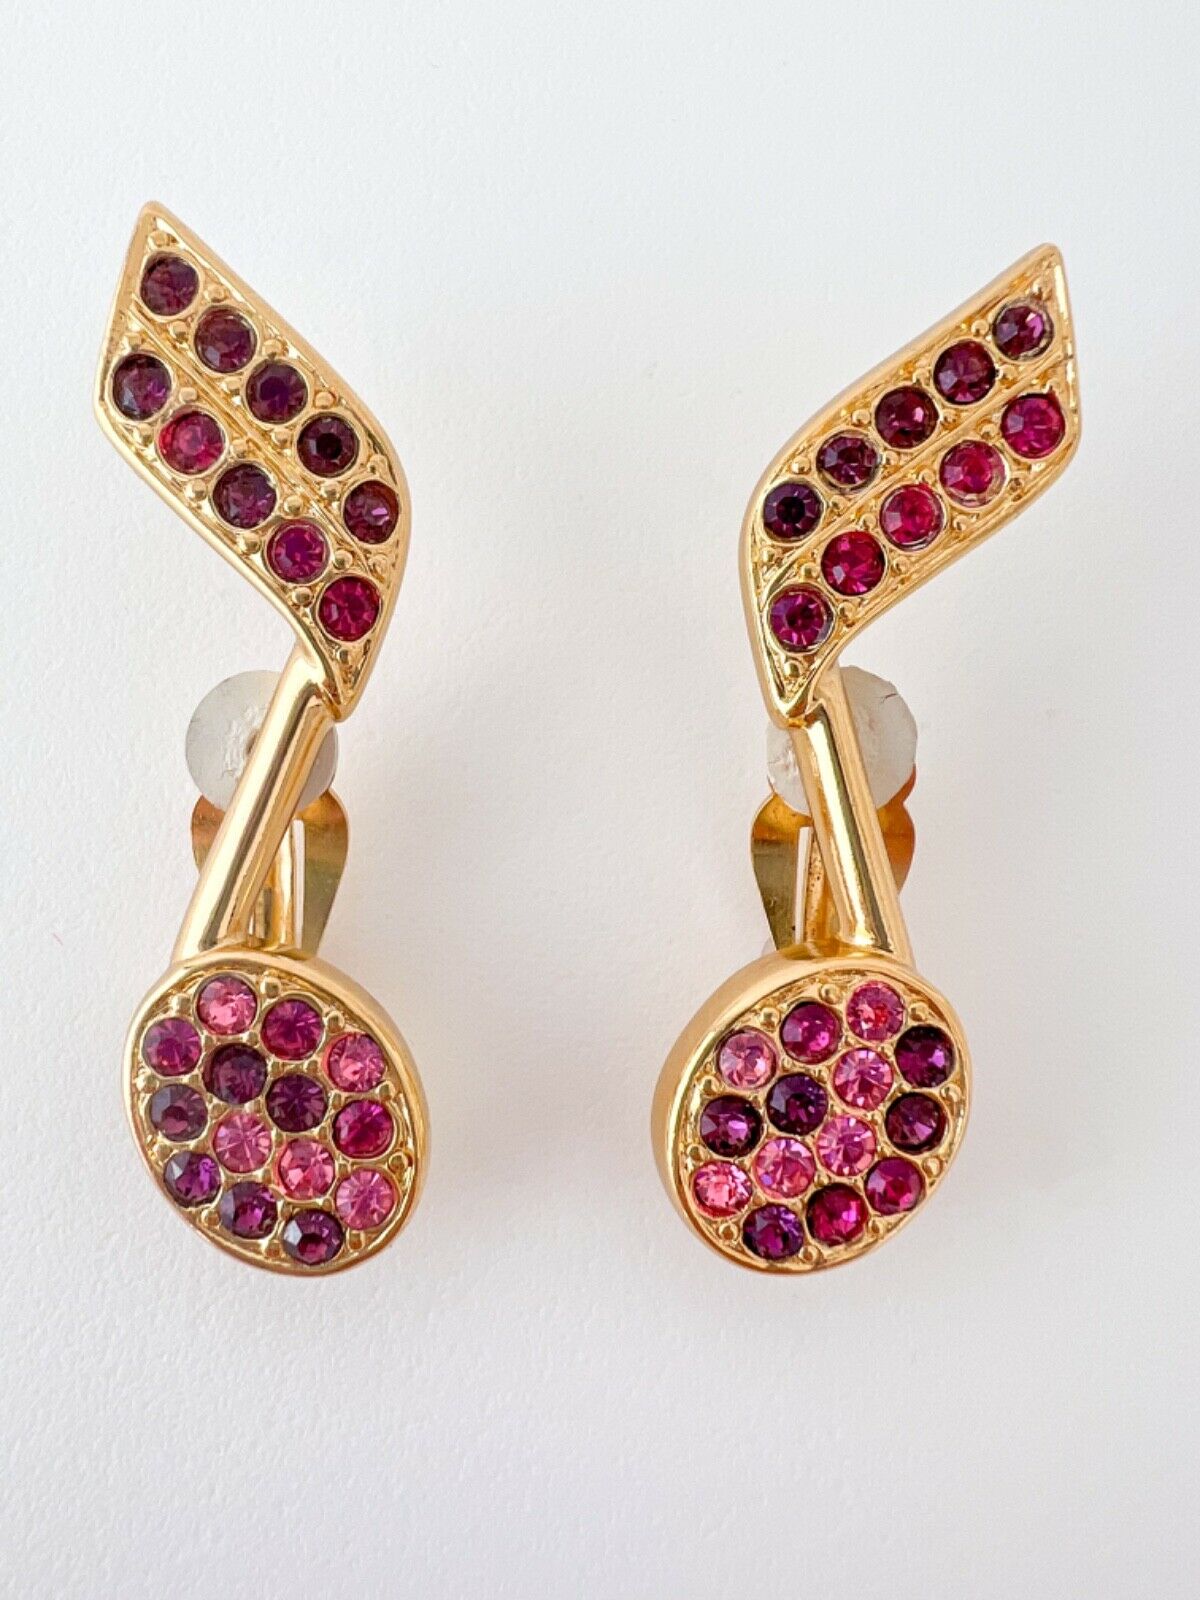 【SOLD OUT】YSL Yves Saint Laurent Vintage Earrings Musical Note Pink Made in France